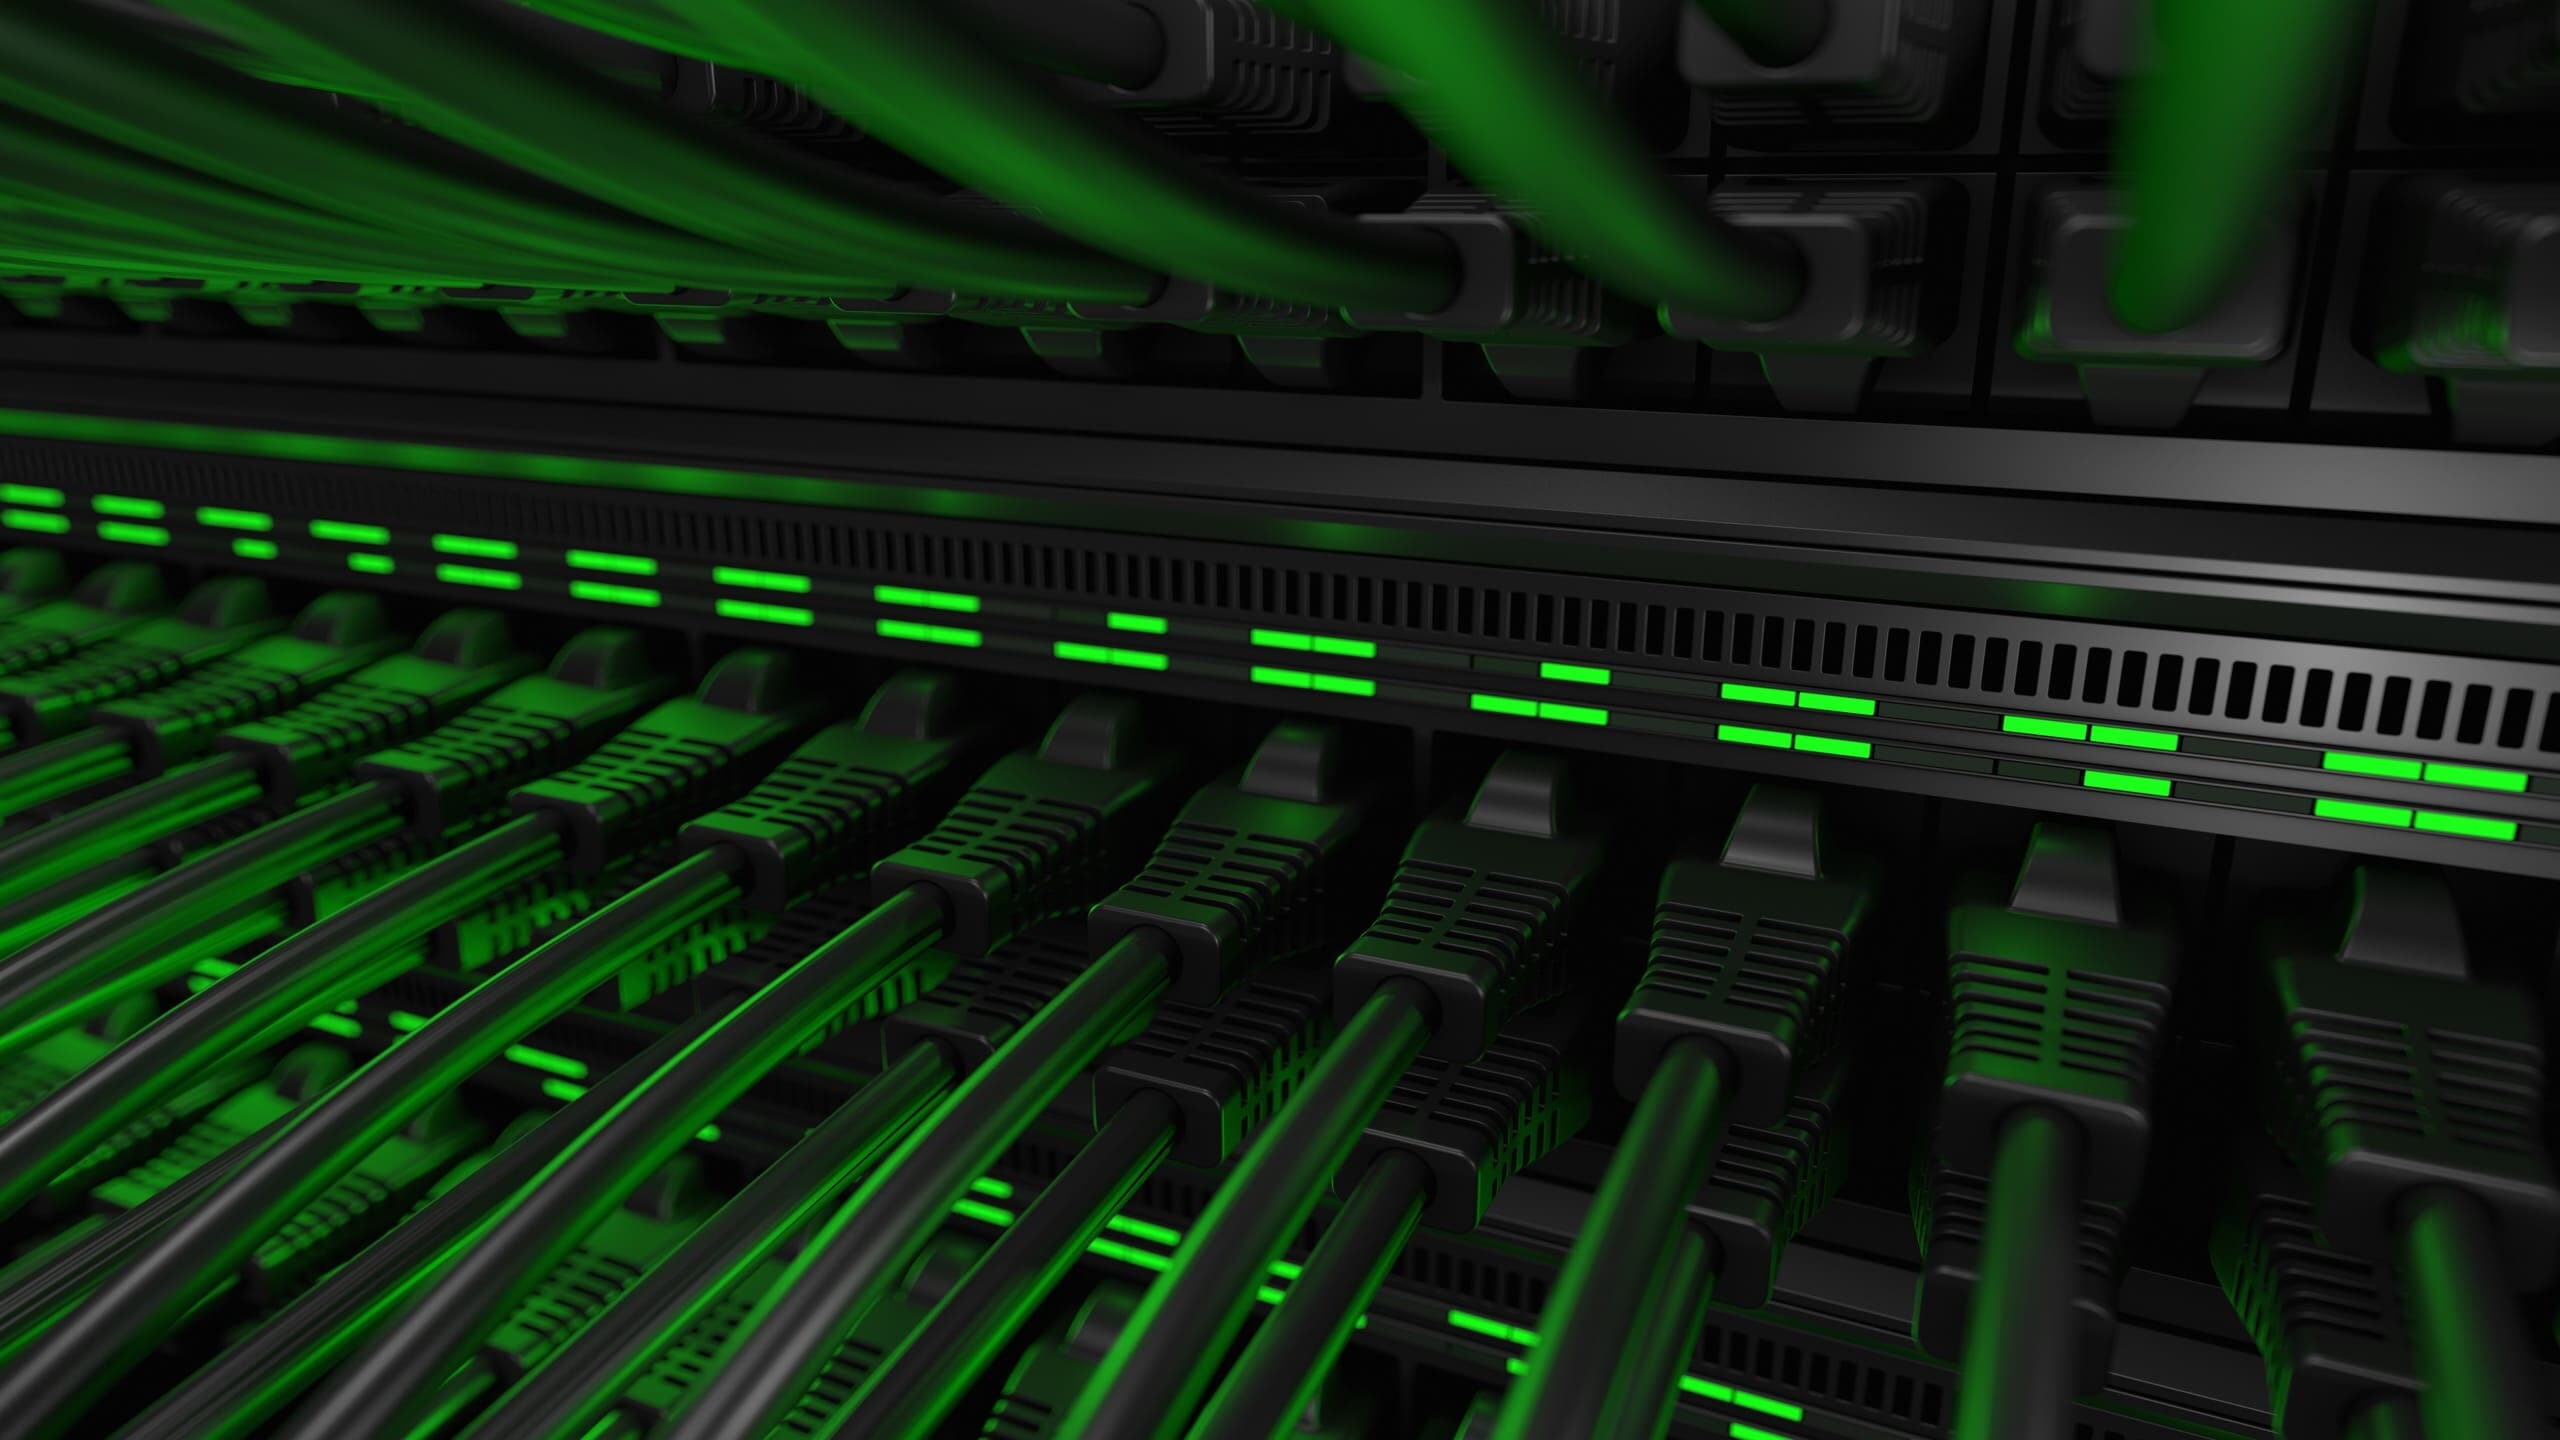 Web server with green lights in a dark room